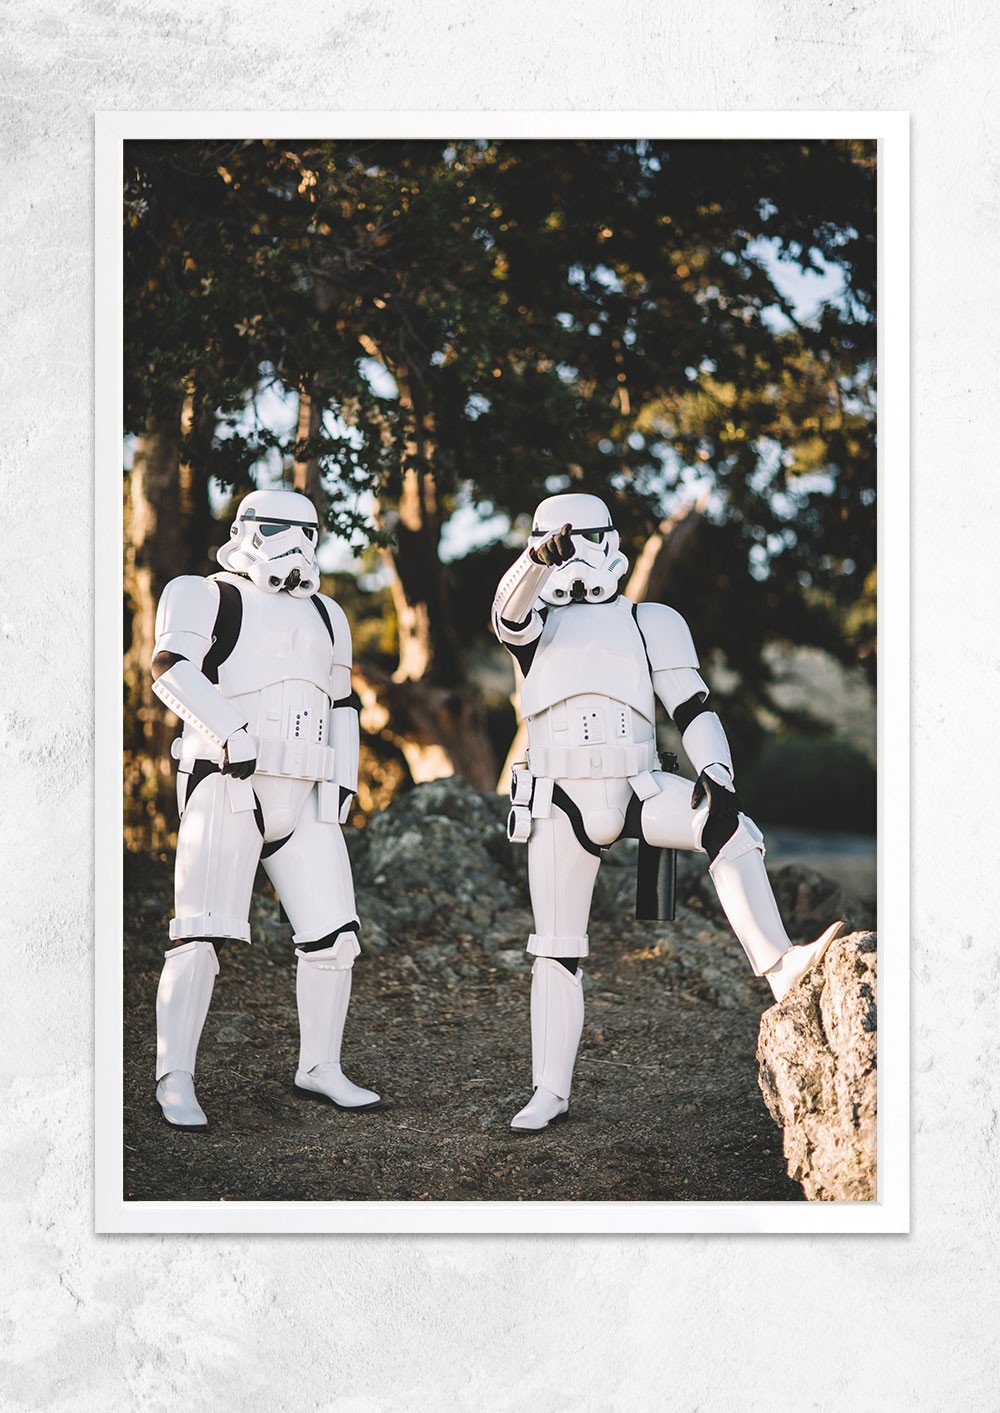 Stormtroopers at Ease